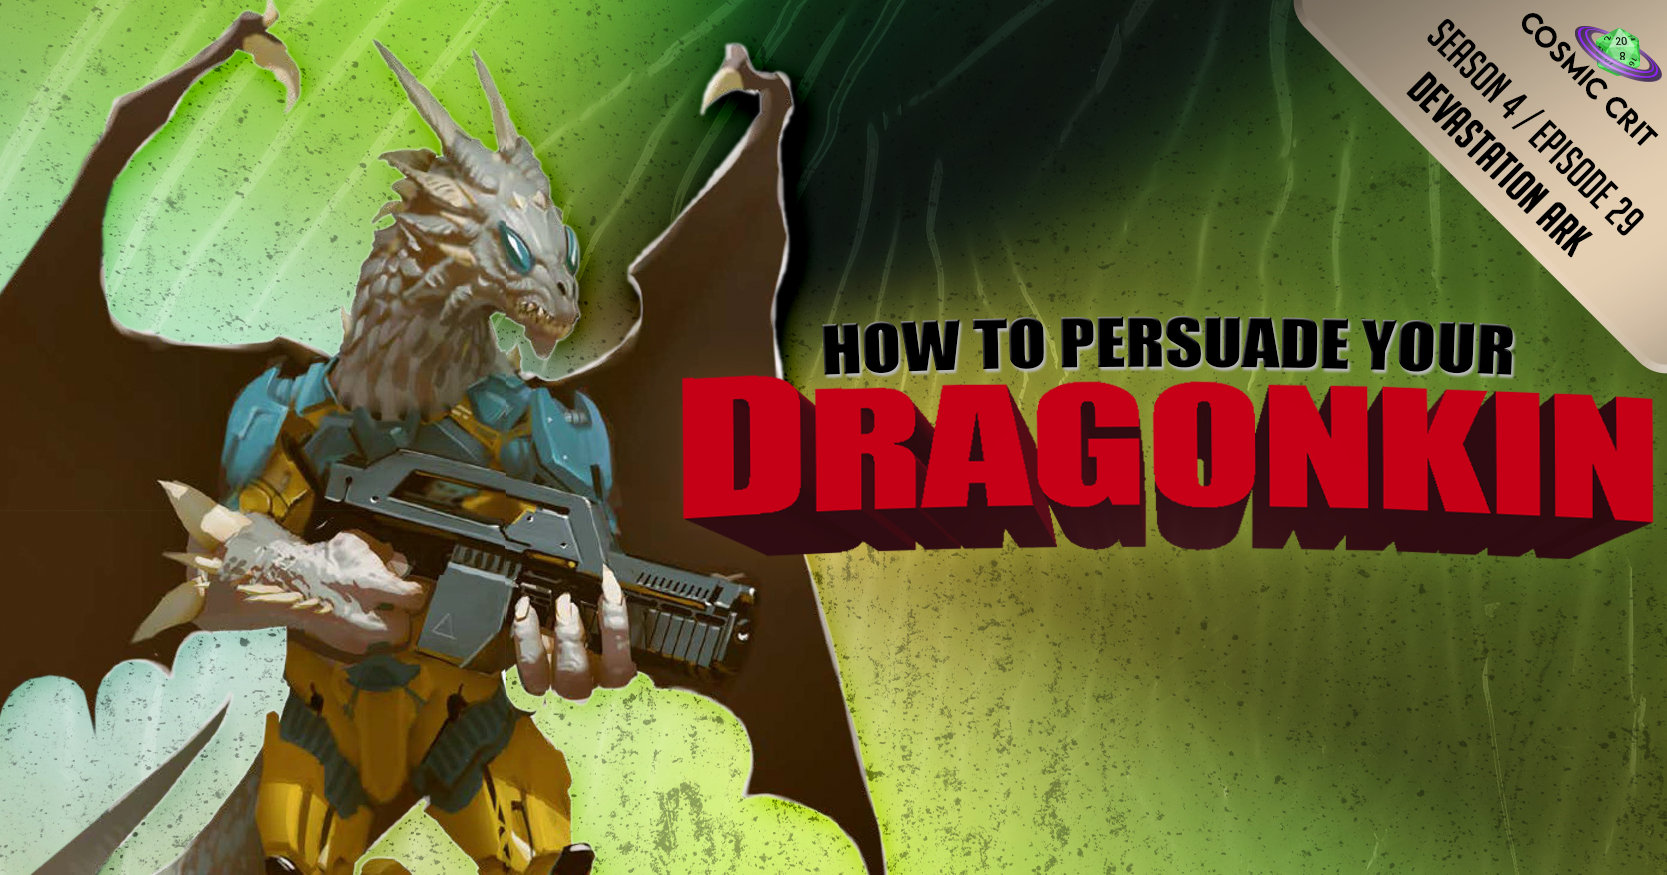 S4 | 228: How to Persuade Your Dragonkin